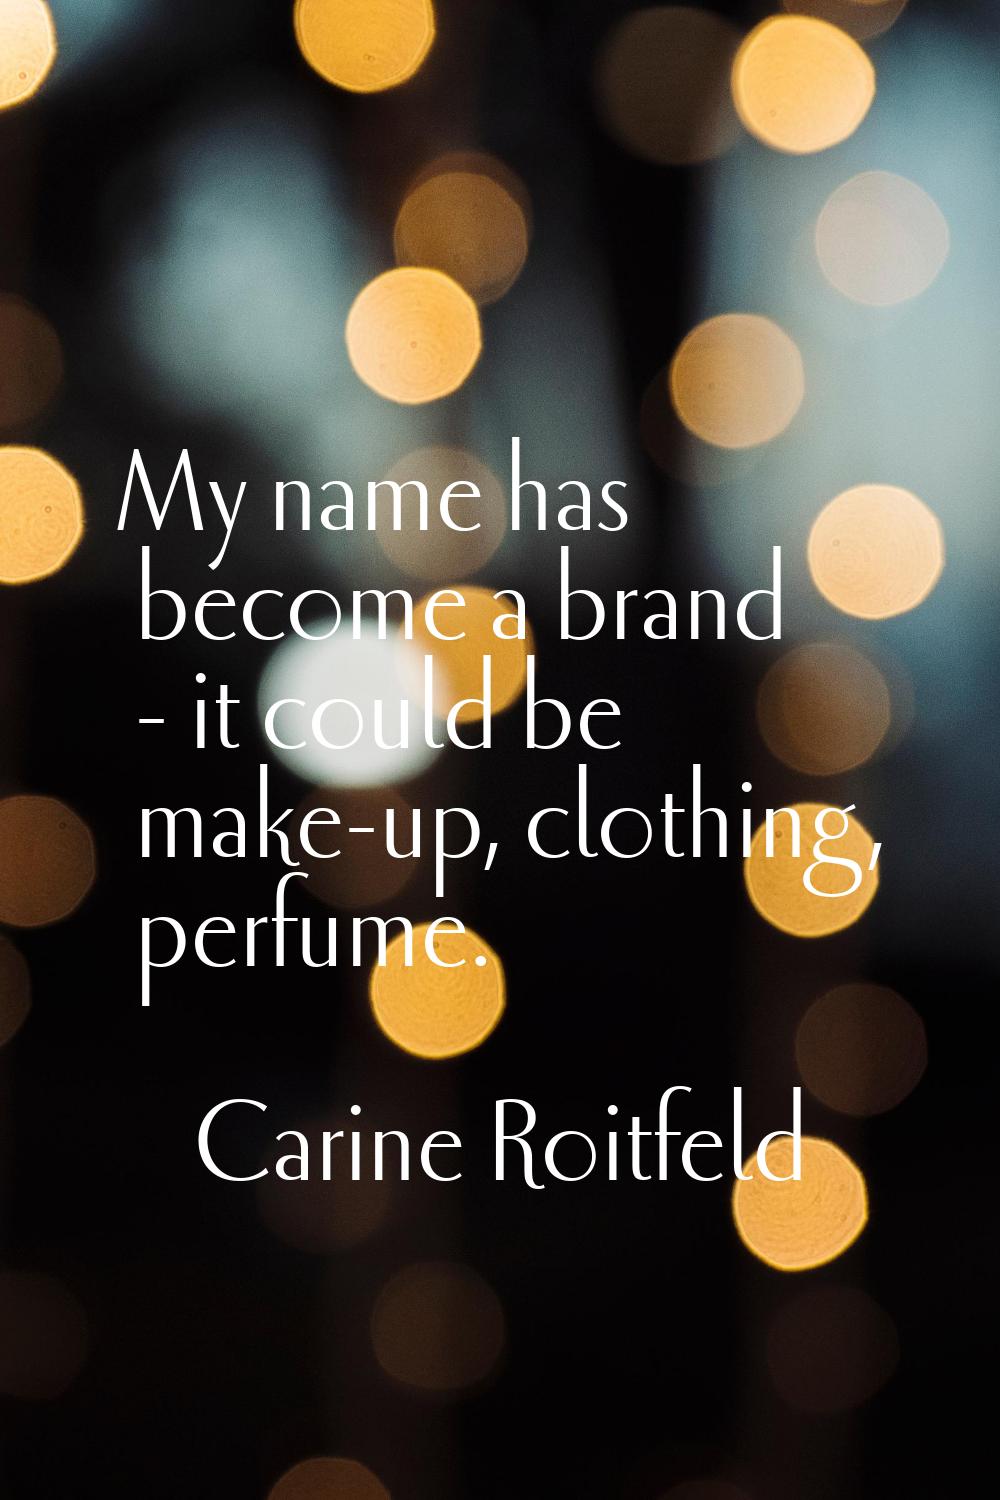 My name has become a brand - it could be make-up, clothing, perfume.